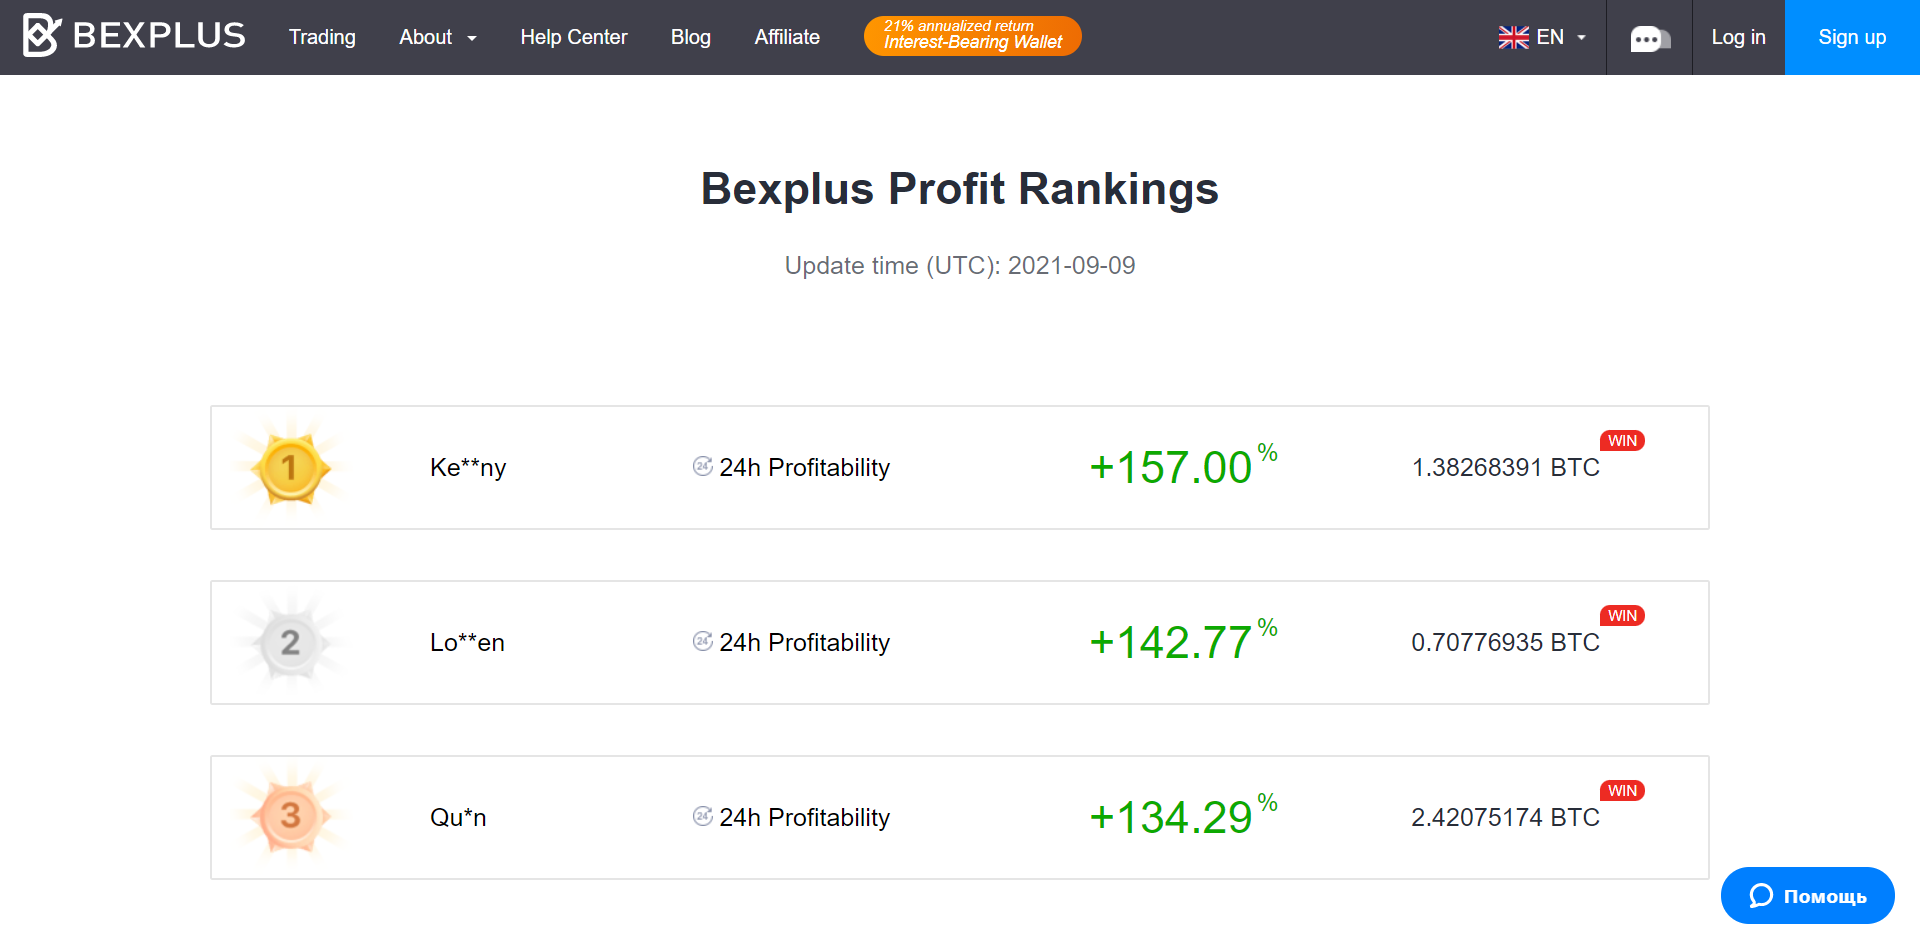 Bexplus launched leaderboard